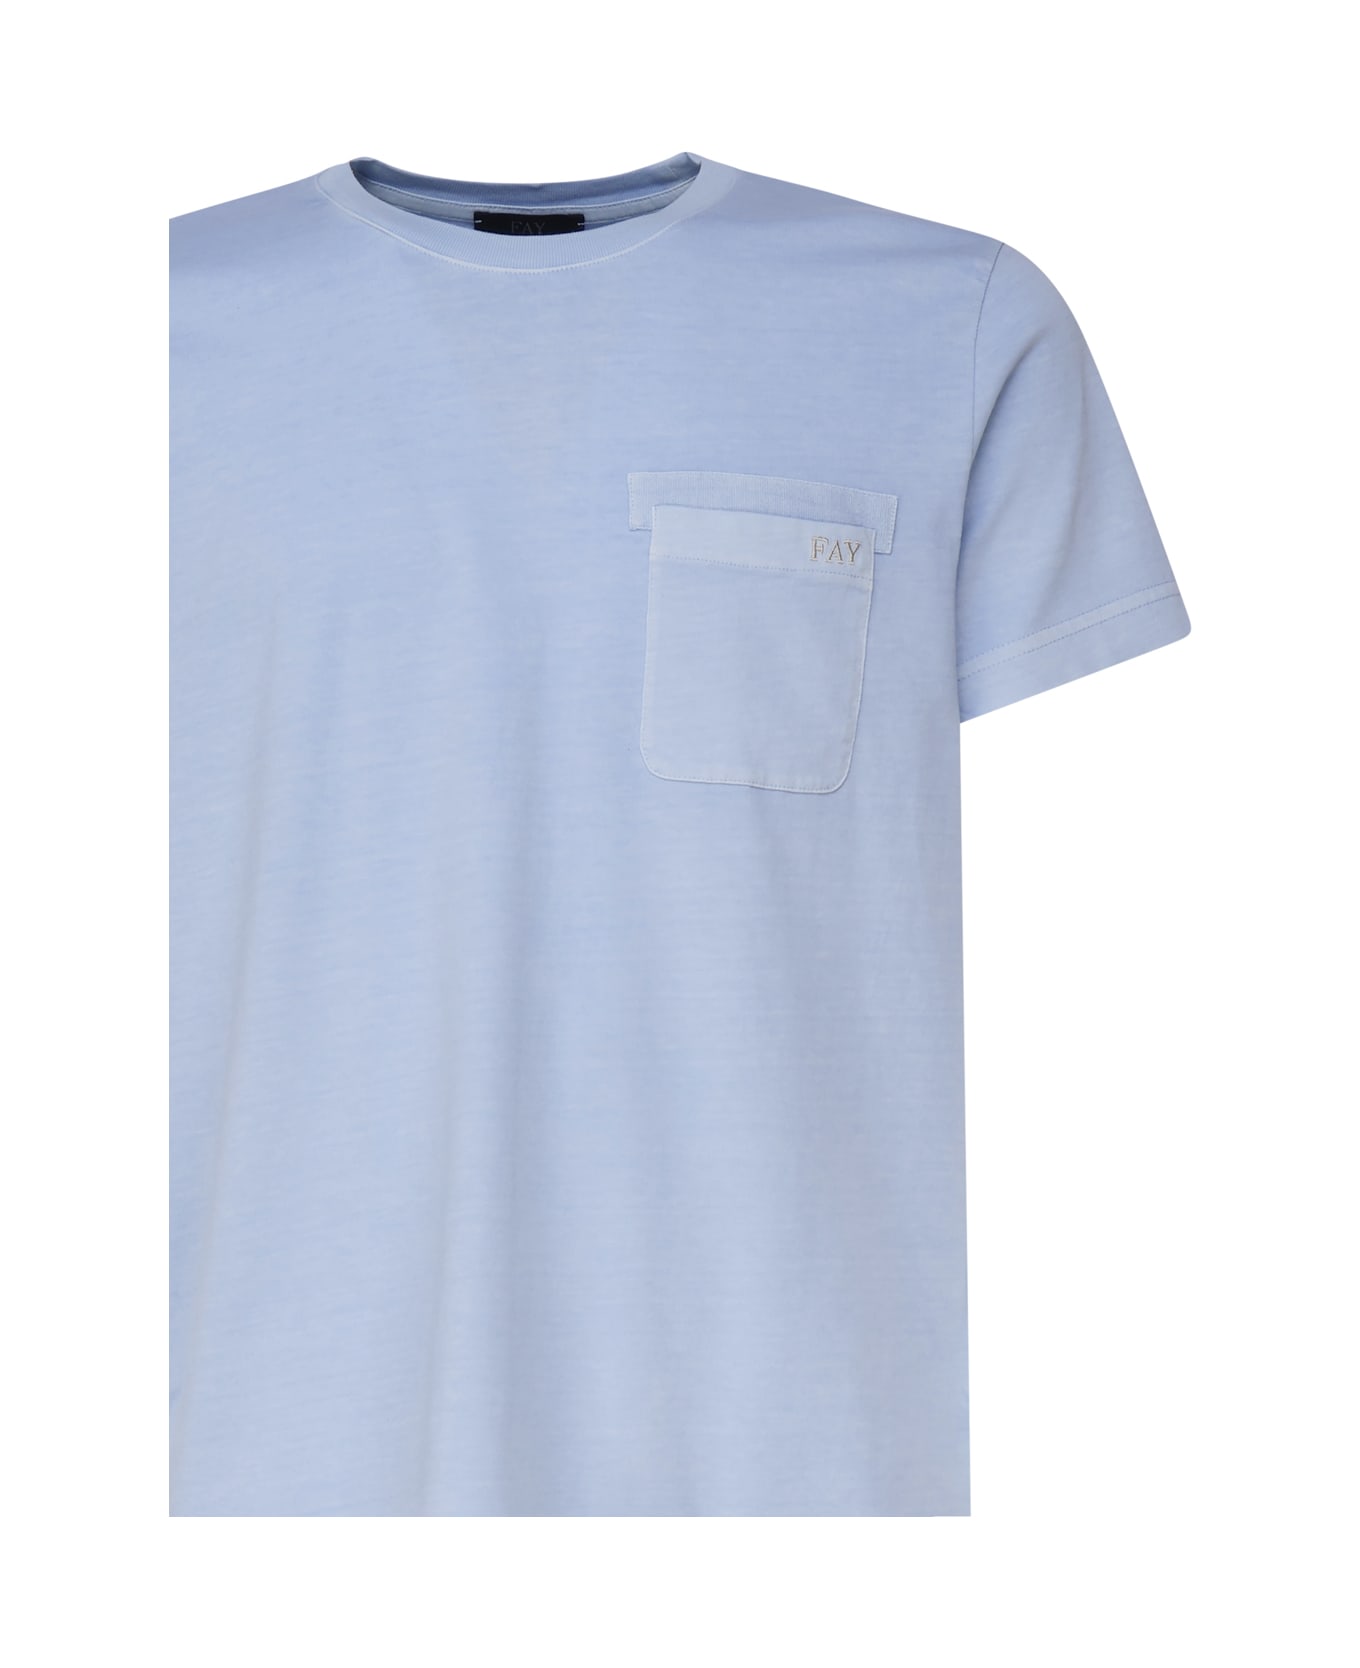 Fay T-shirt With Pocket - Light blue シャツ